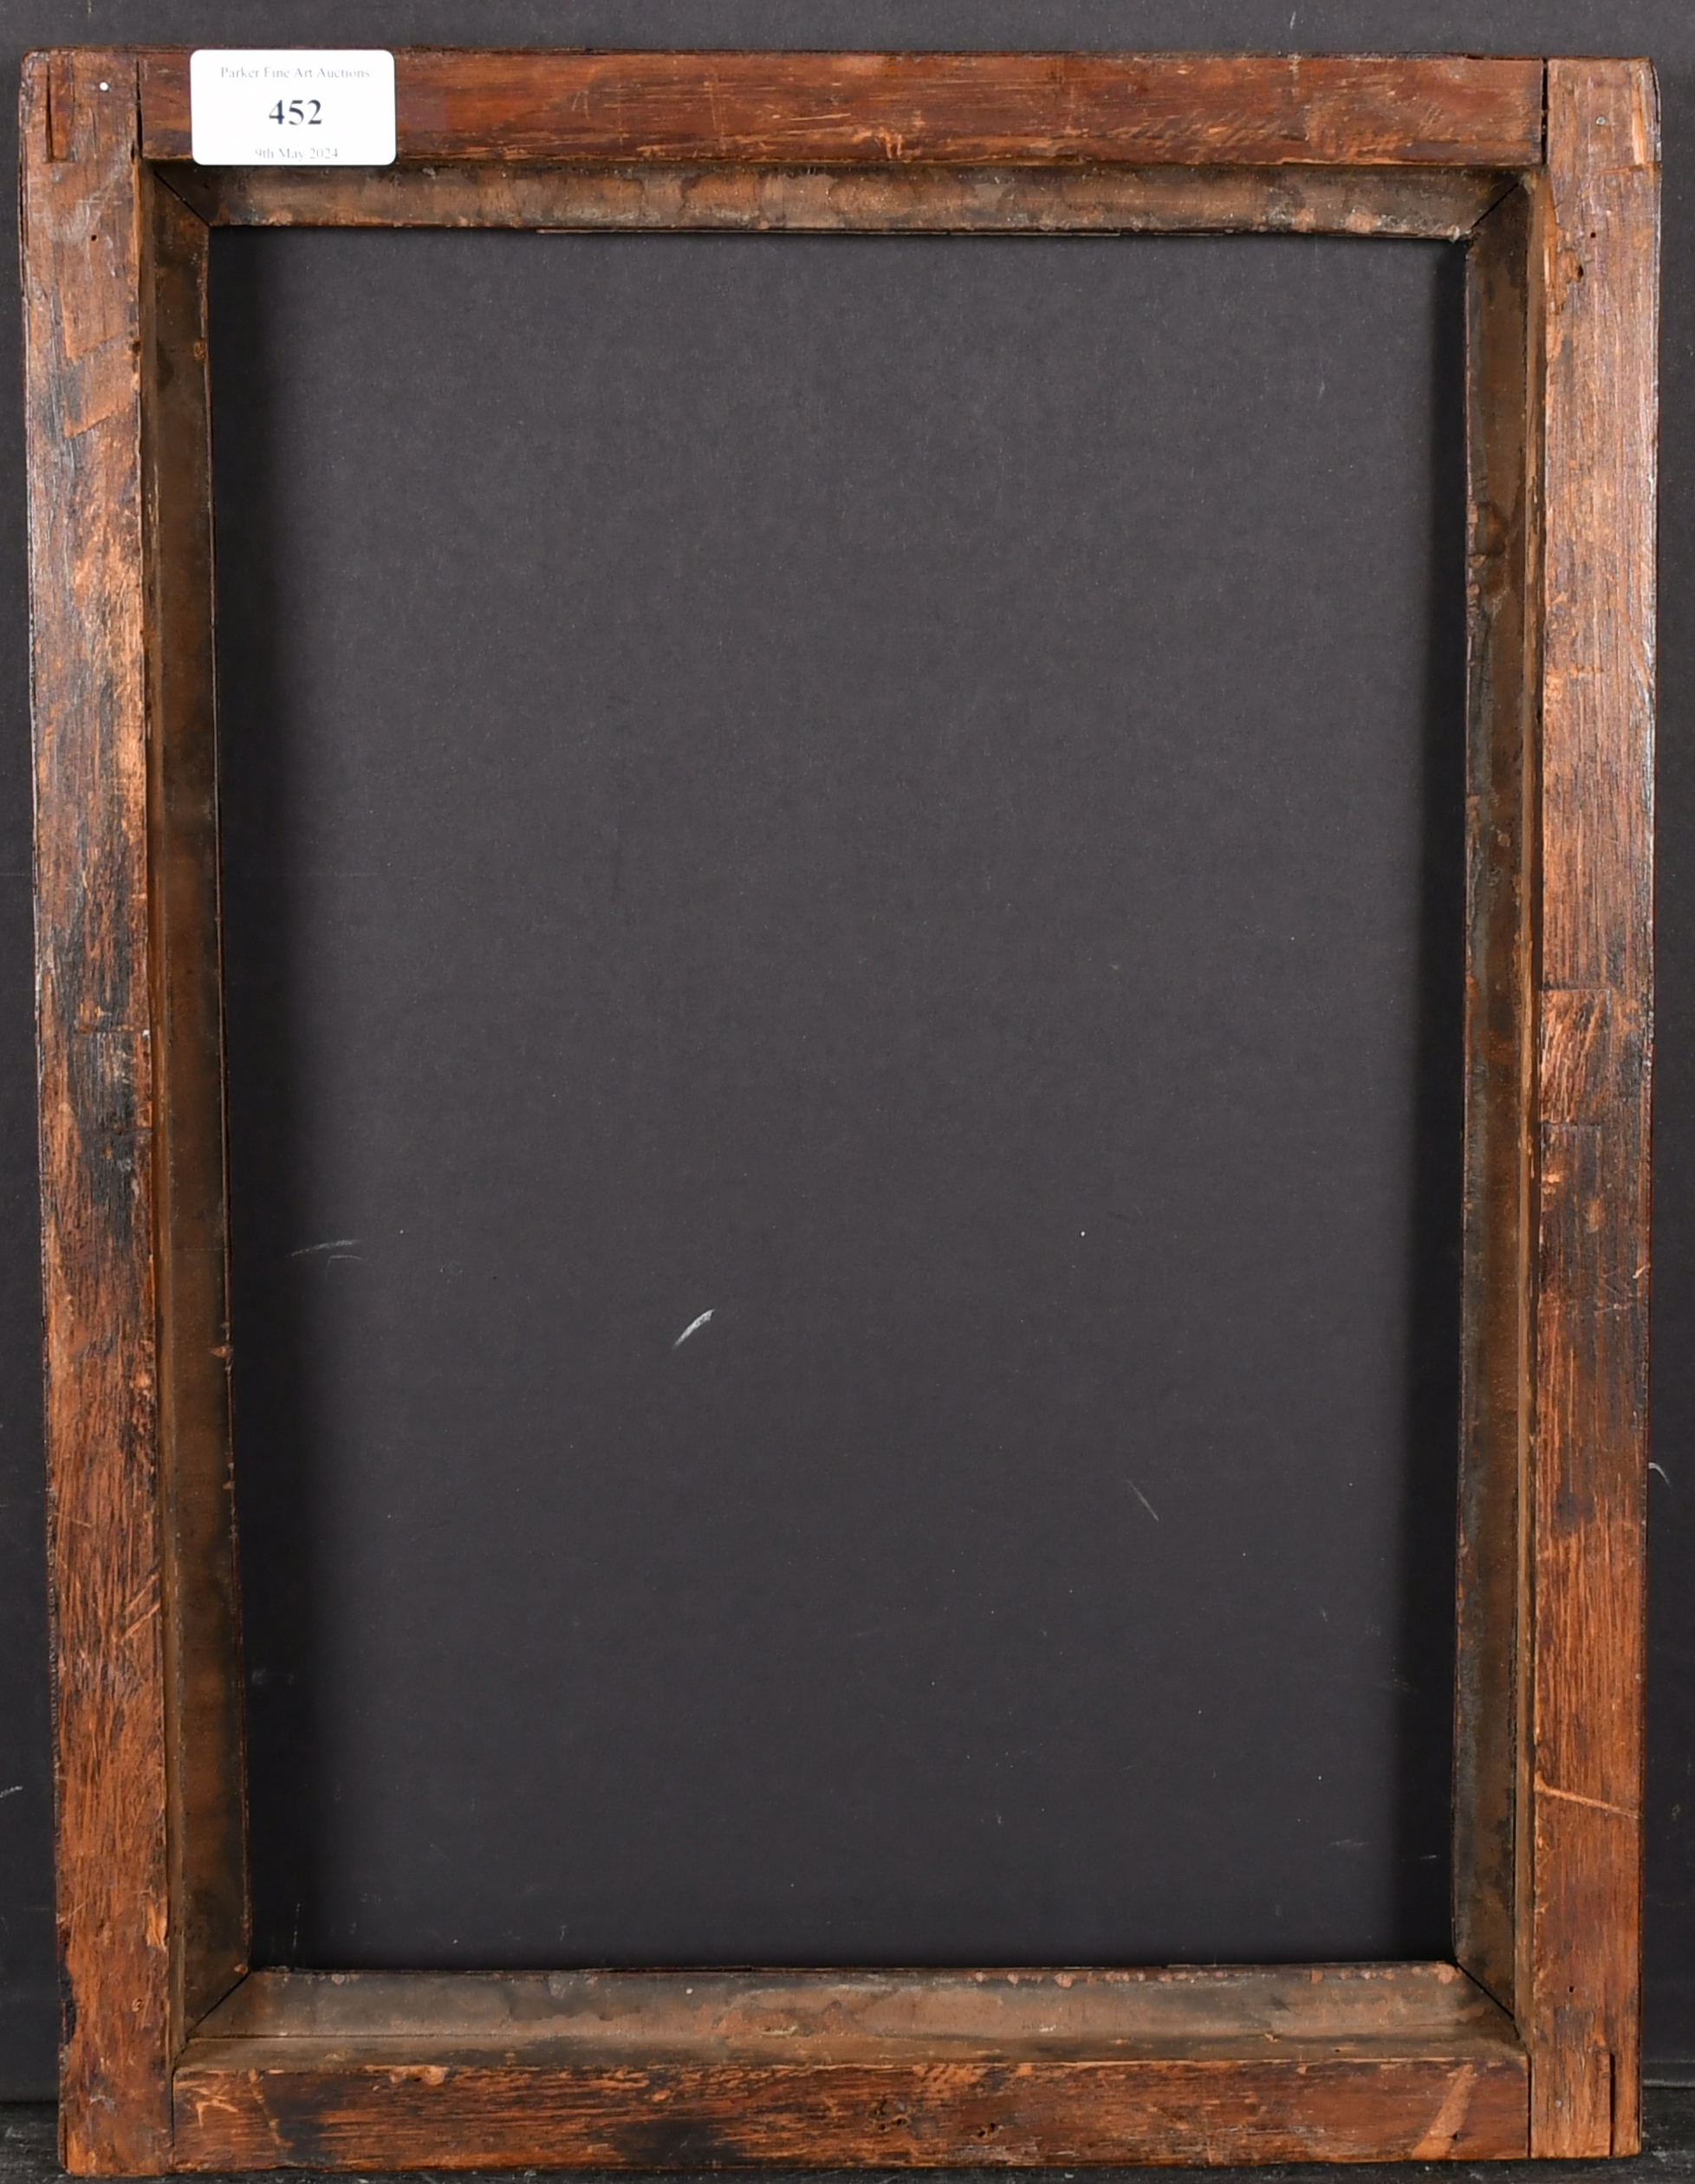 18th Century English School. A Wooden Frame, rebate 14.25" x 10.25" (36.2 x 26cm) - Image 3 of 3